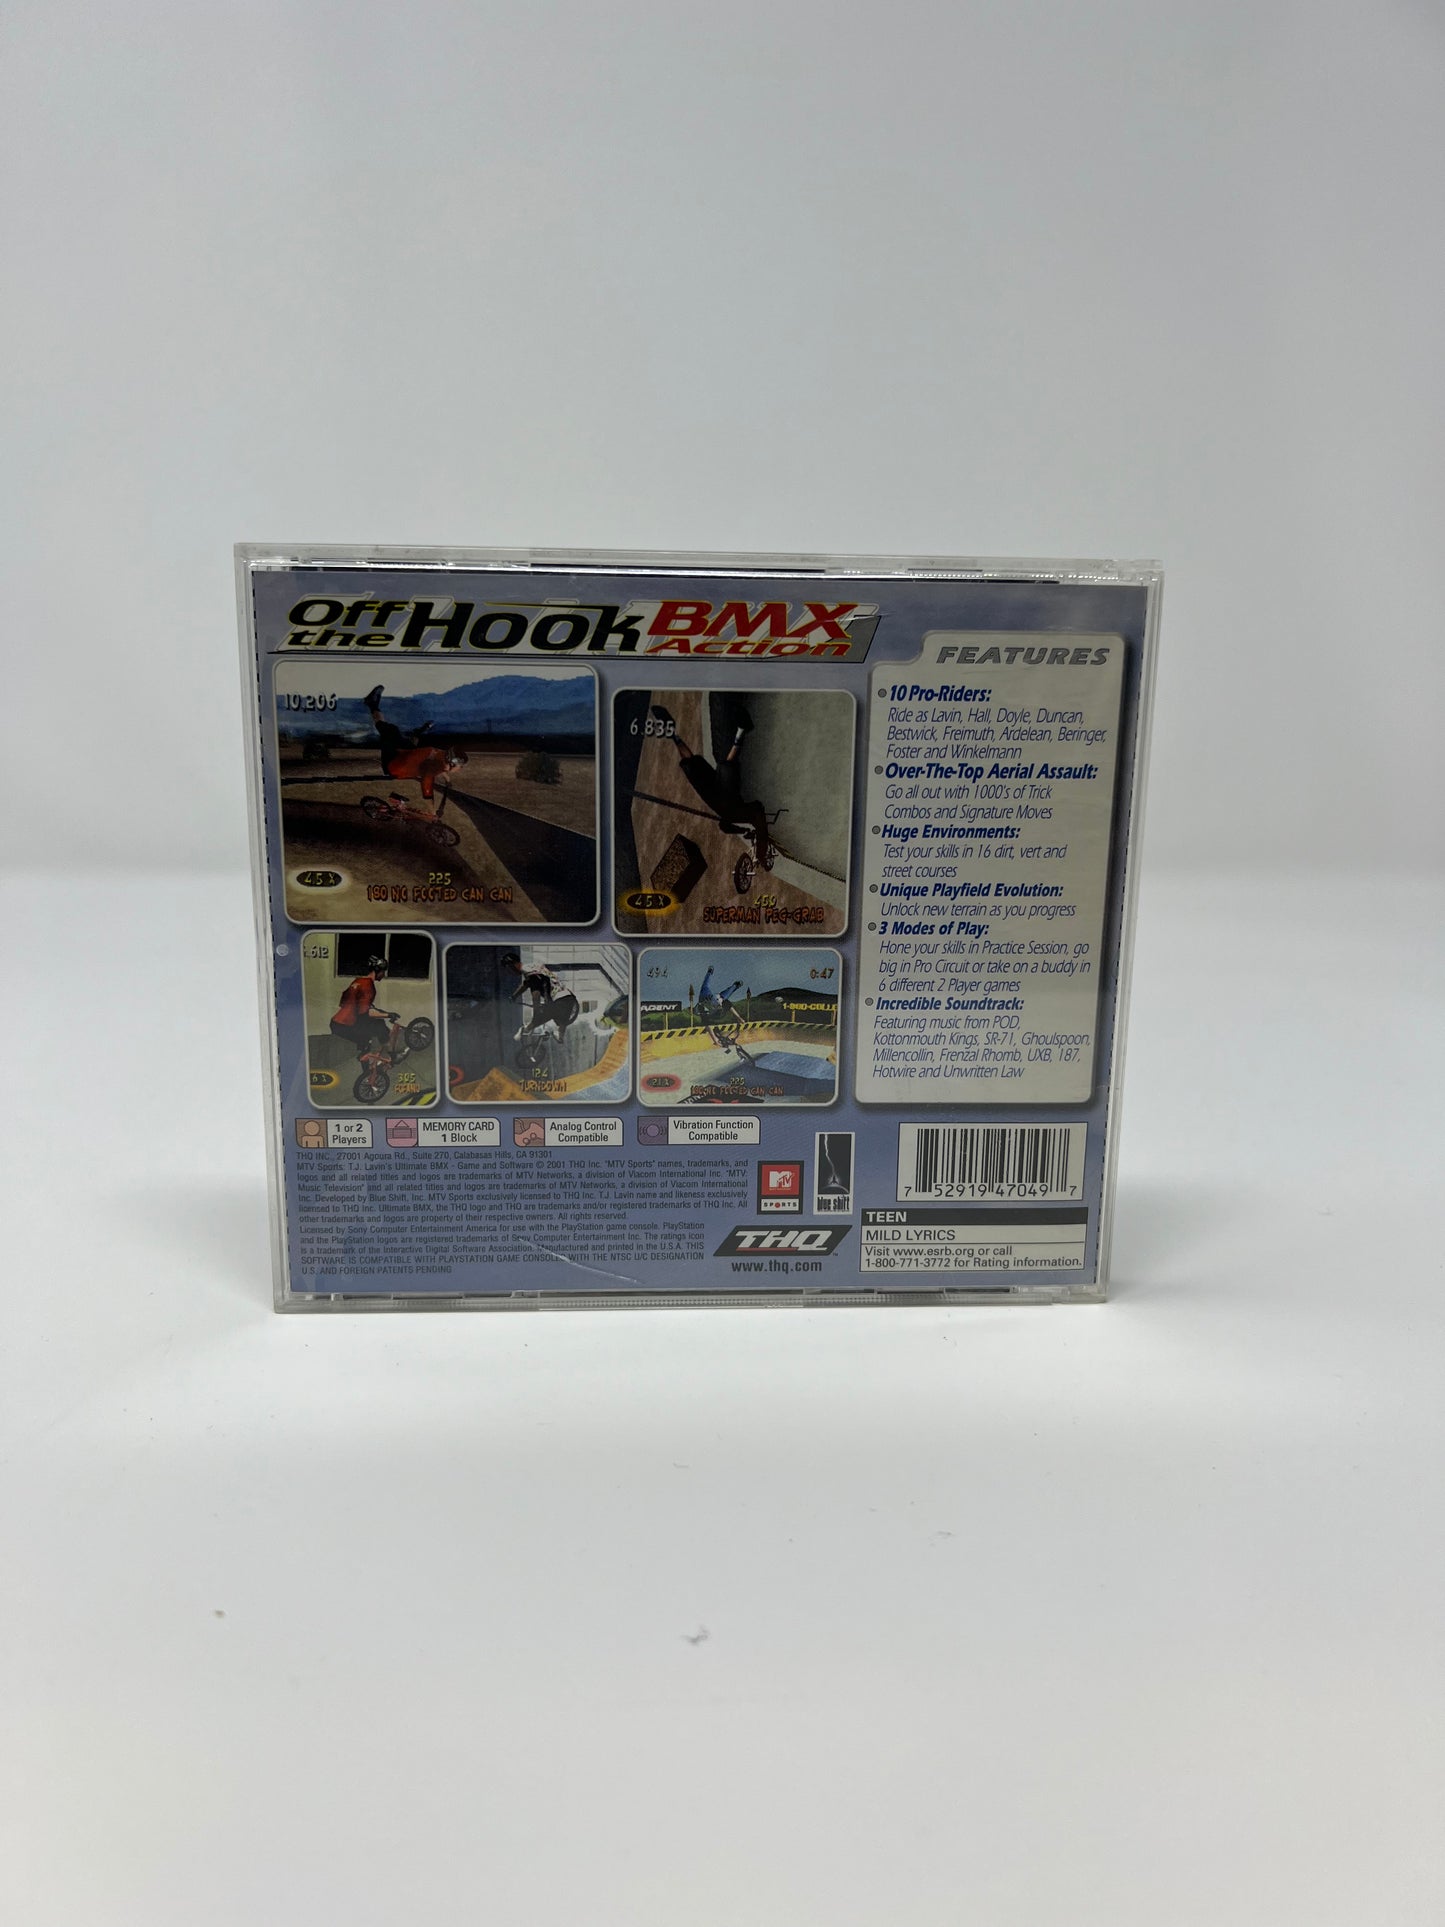 MTV Sports: T.J. Lavin's Ultimate BMX - PS1 Game - Used